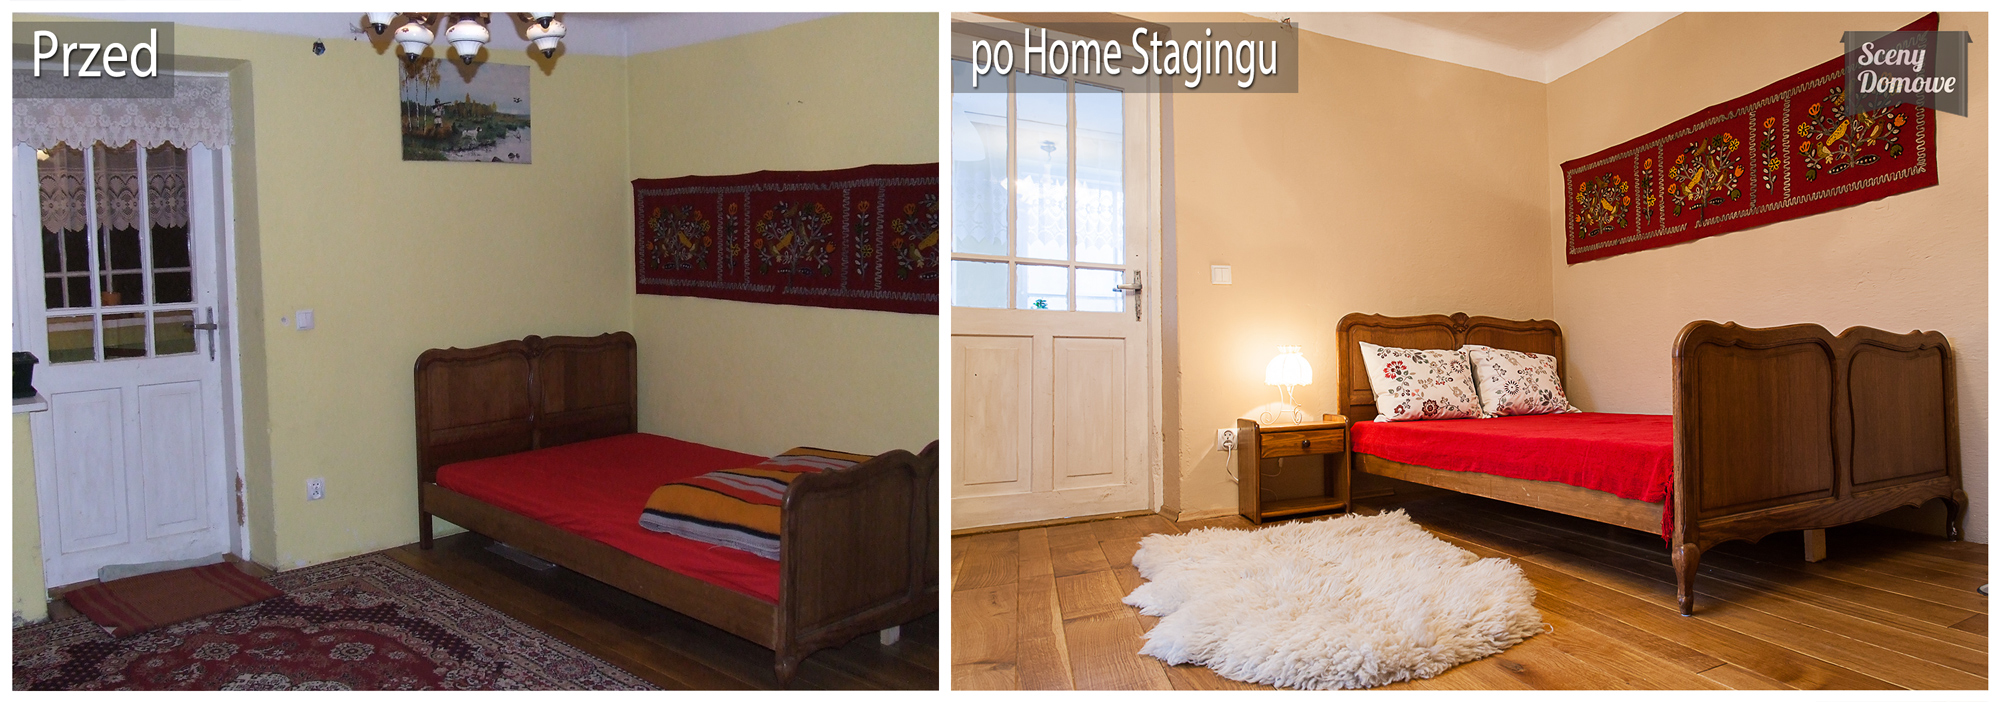 home staging domu